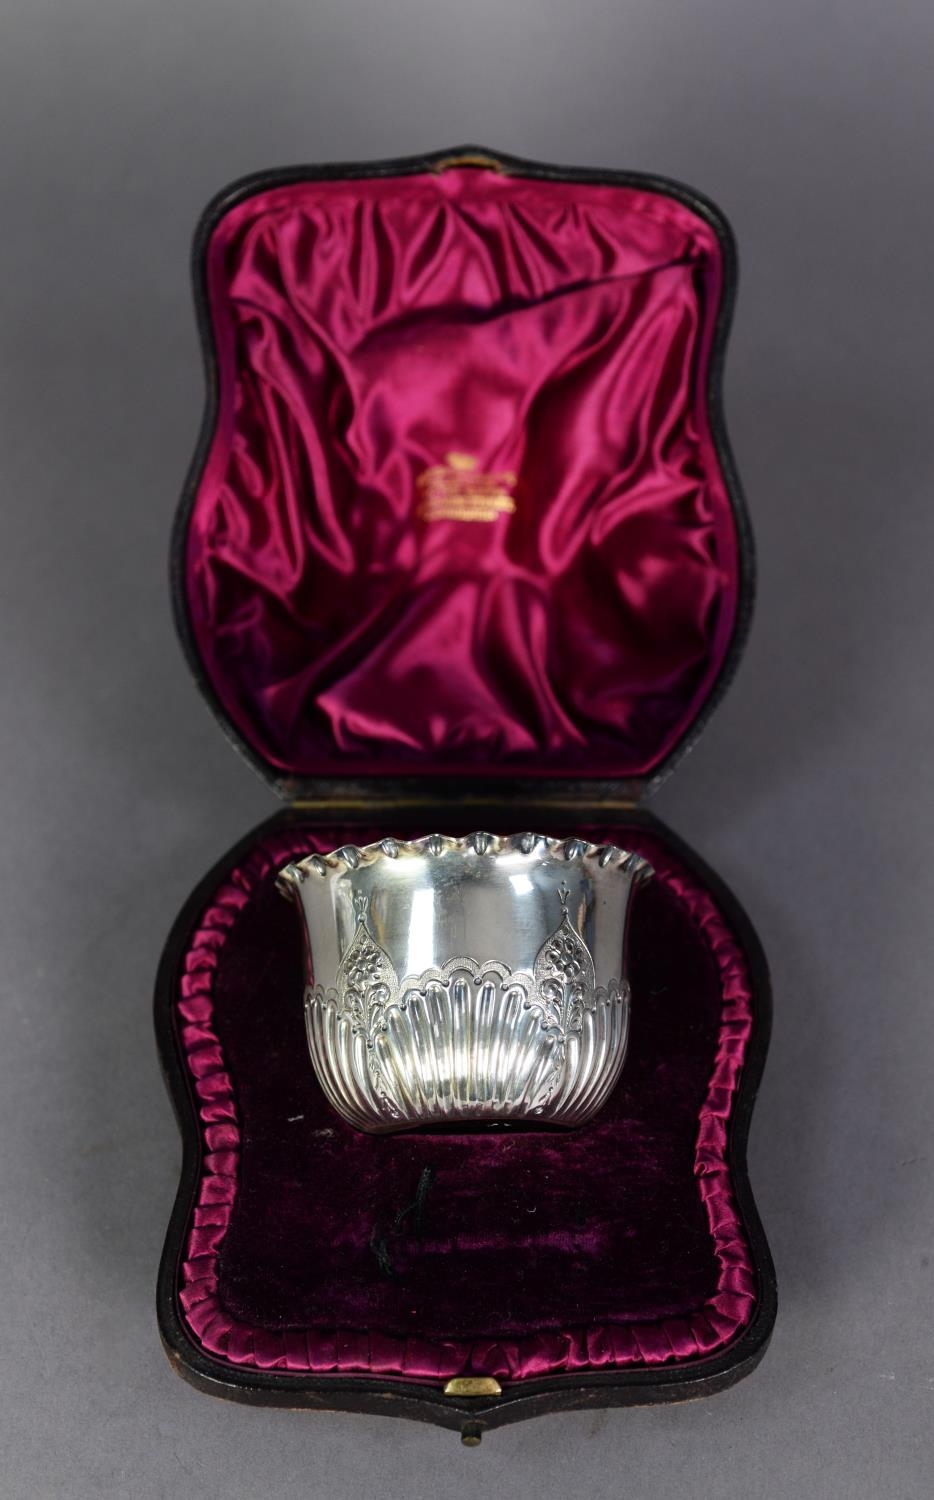 LATE VICTORIAN CASED SILVER SUGAR BOWL with gilded interior, originally with a spoon (now absent), - Image 2 of 2